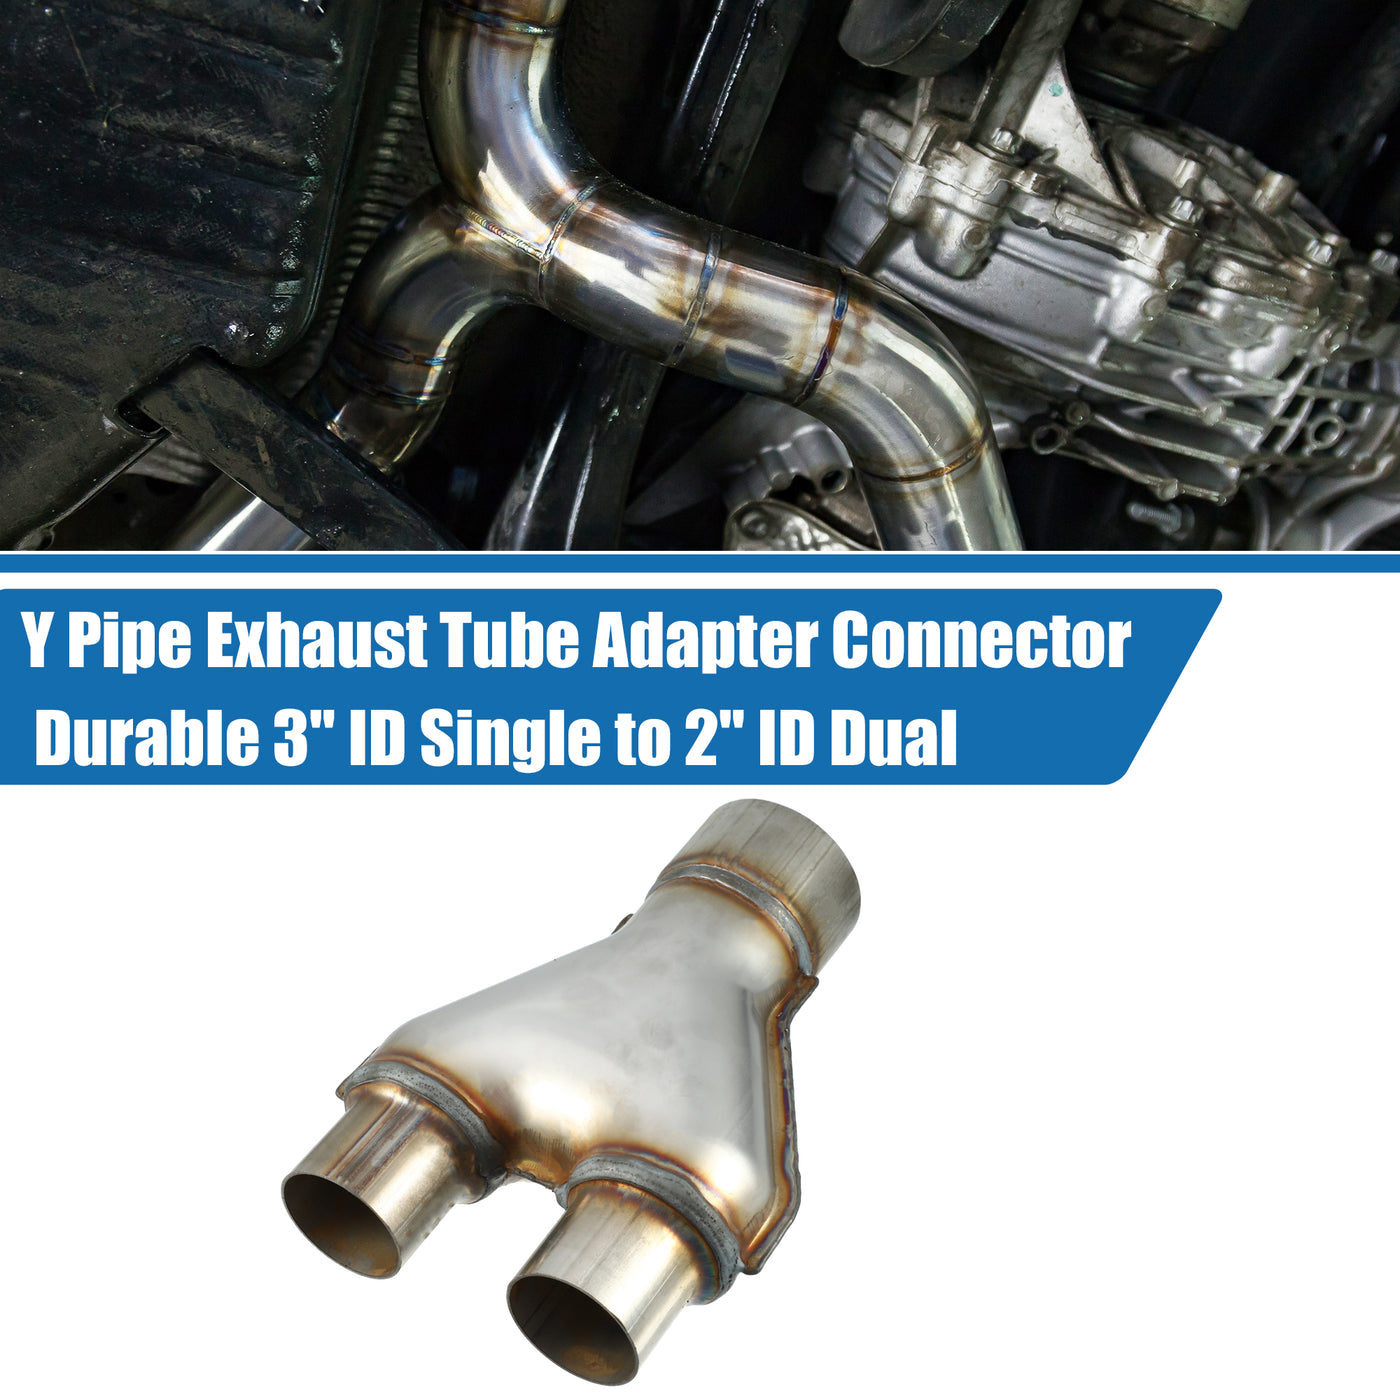 A ABSOPRO Y Pipe Exhaust Tube Adapter Connector Durable 3" ID Single to 2" ID Dual Exhaust Adapter Connector 10 Inch Overall Length T409 Stainless Steel Silver Tone